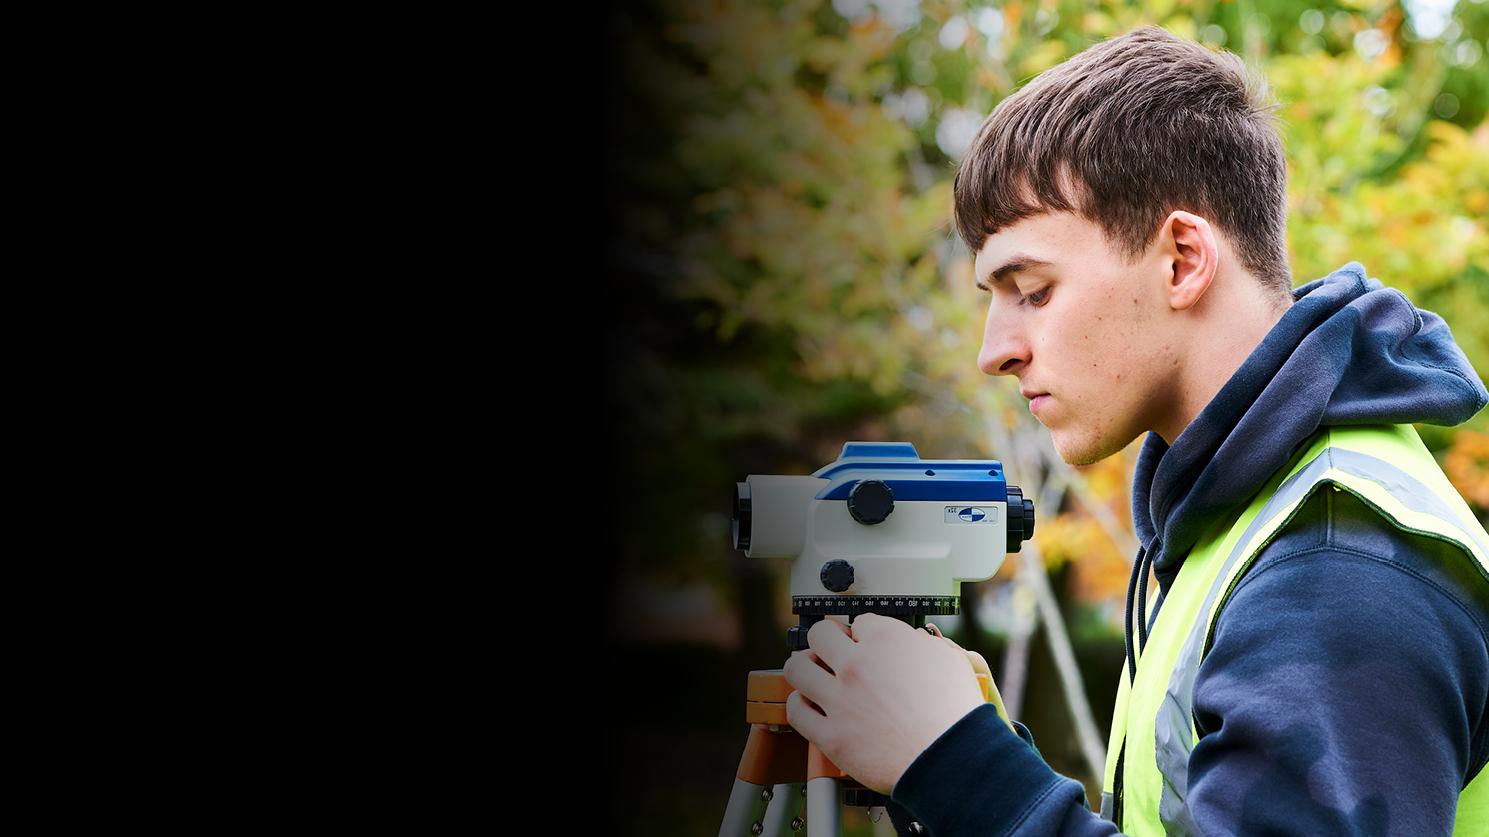 Young person with surveying equipment